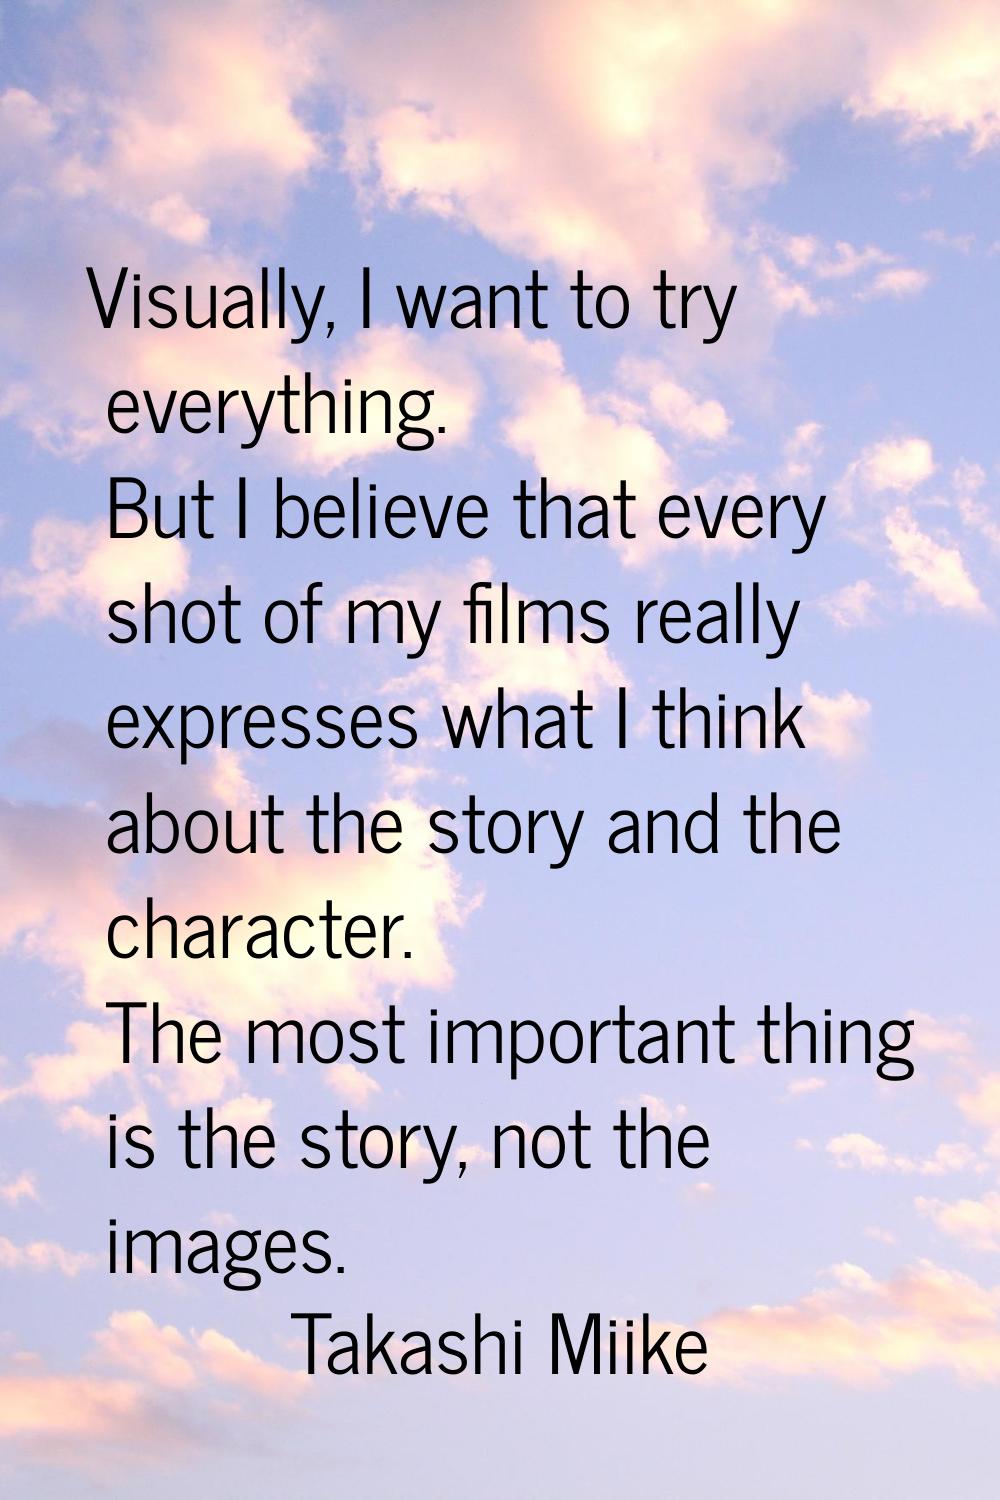 Visually, I want to try everything. But I believe that every shot of my films really expresses what